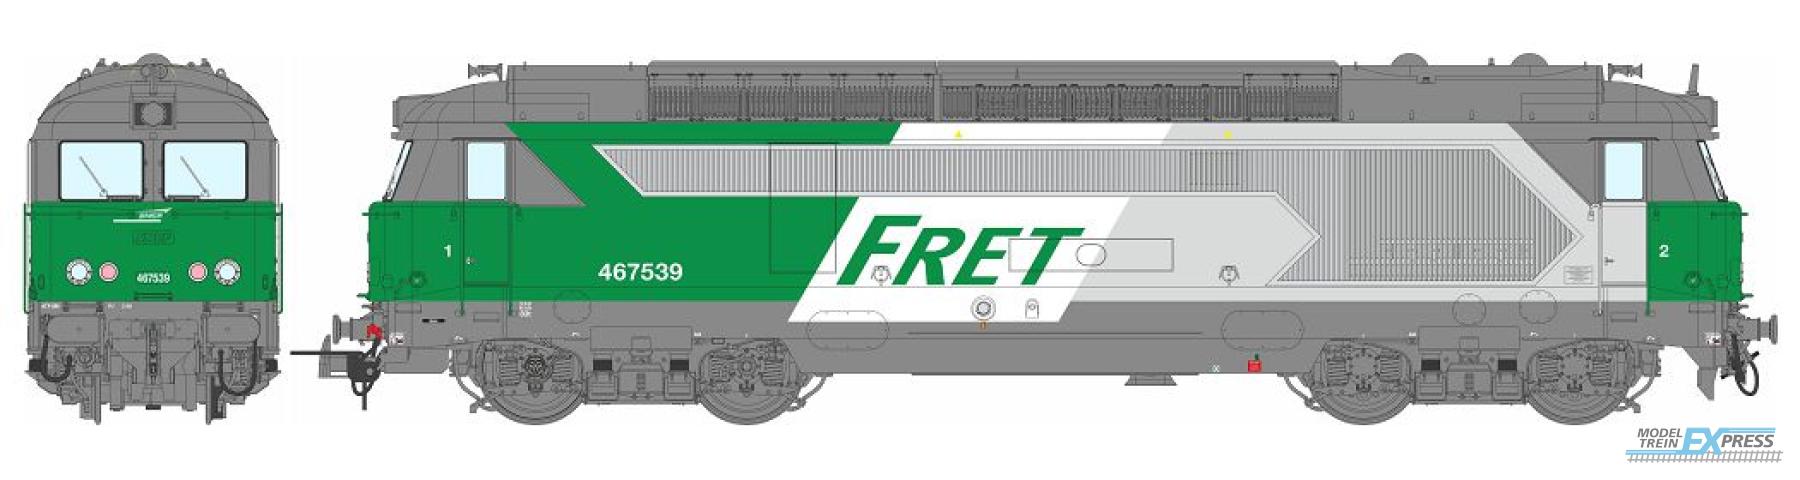 REE models MB-168S BB-67539 NEVERS "FRET" with side grid, grey roof Era V - DCC SOUND and Smoke